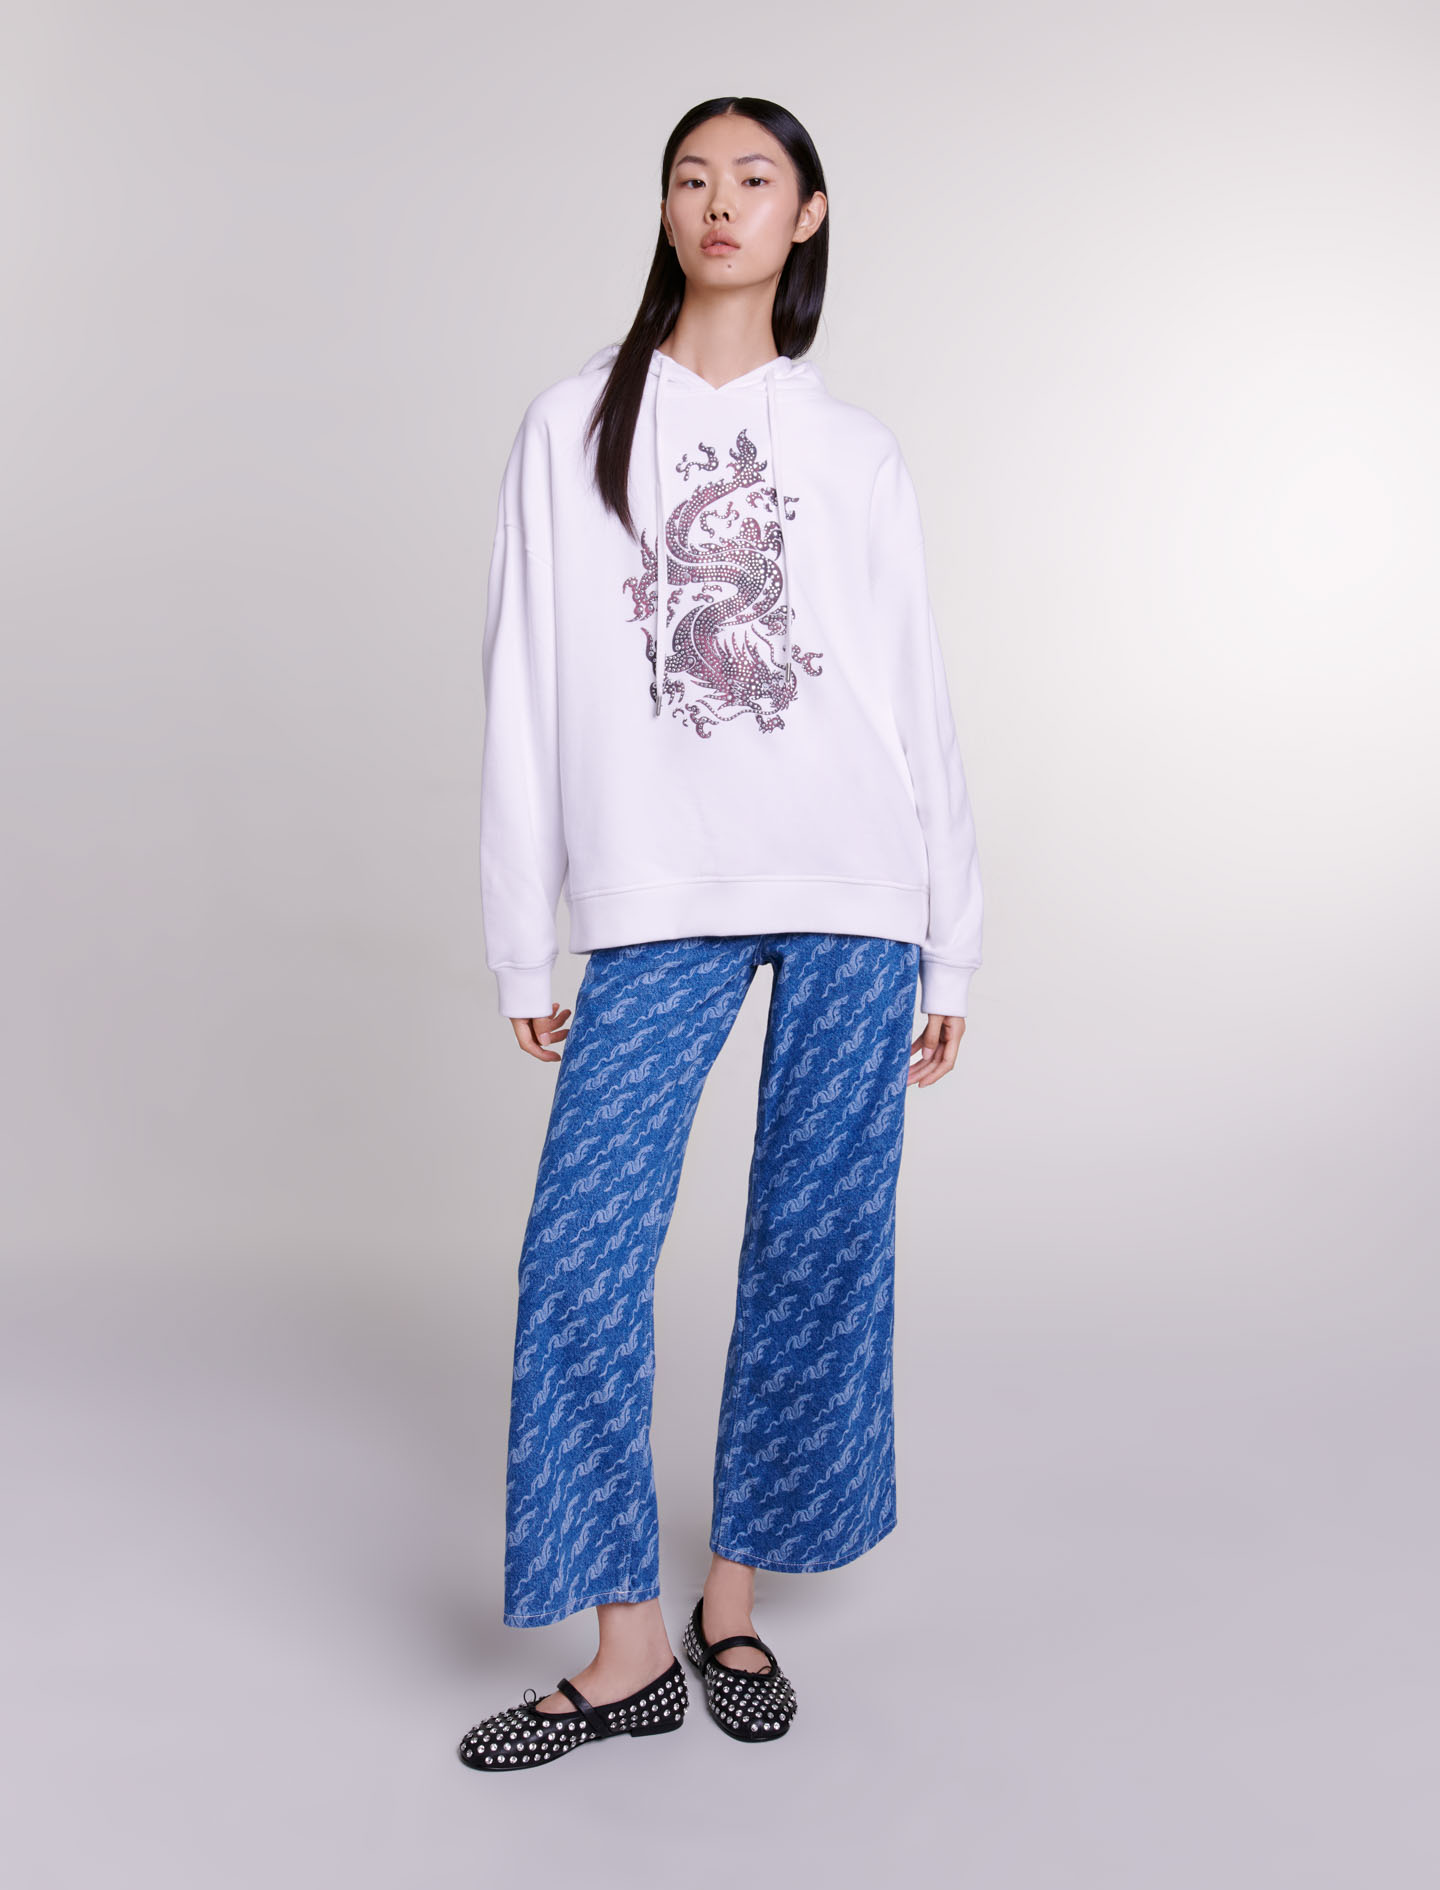 Maje Woman's cotton Embroidery: Oversized sweatshirt for Spring/Summer, in color White / White